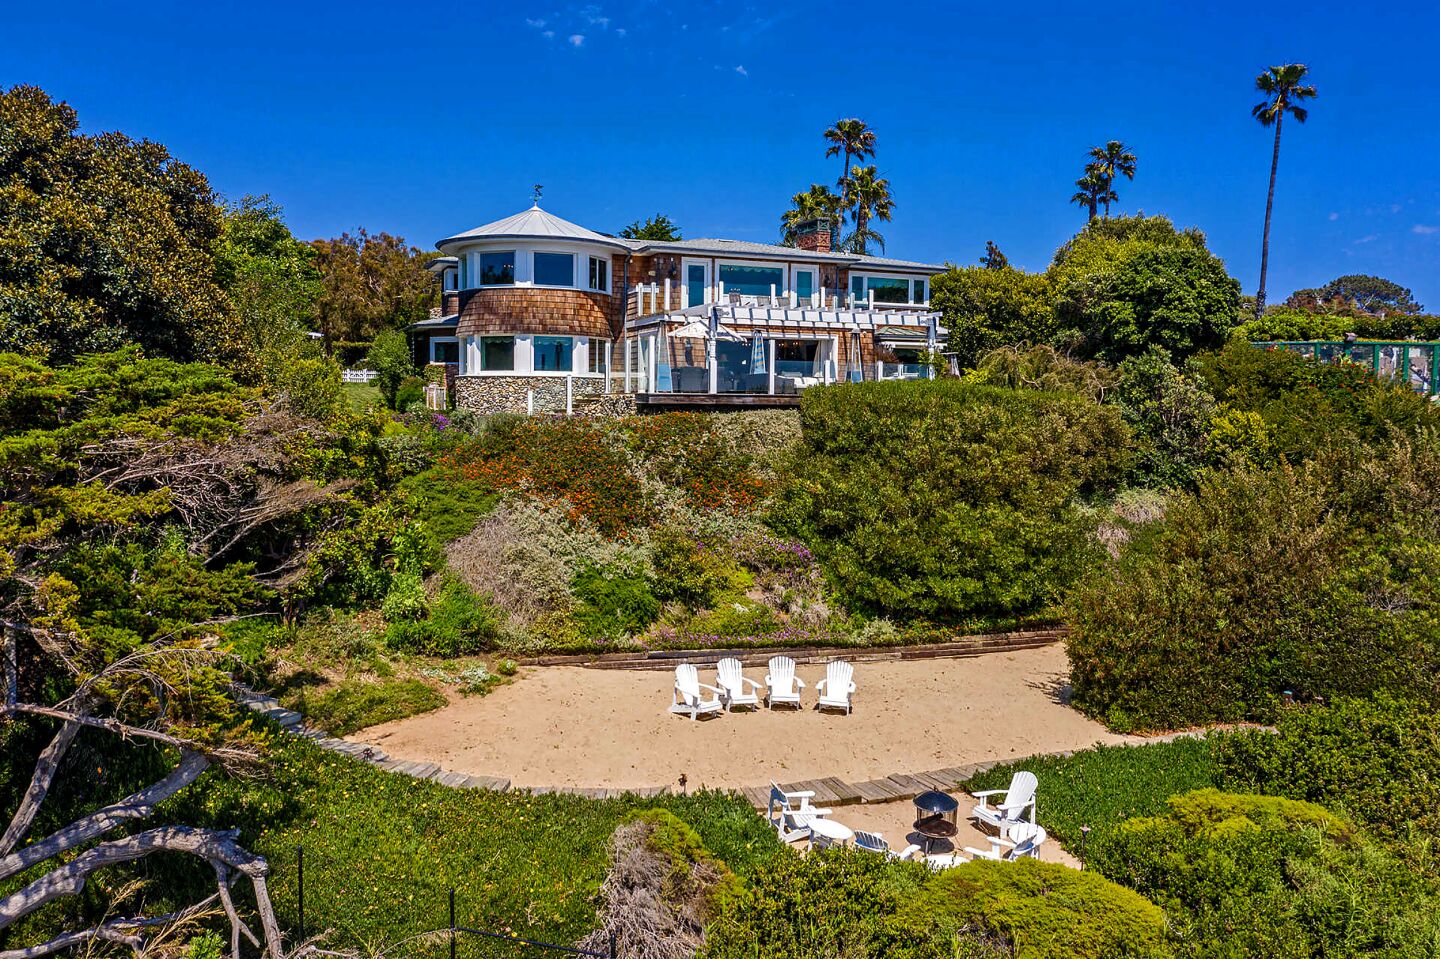 This coastal Cape Cod overlooks the ocean from a bluff in Point Dume, descending to a stretch of private beach.